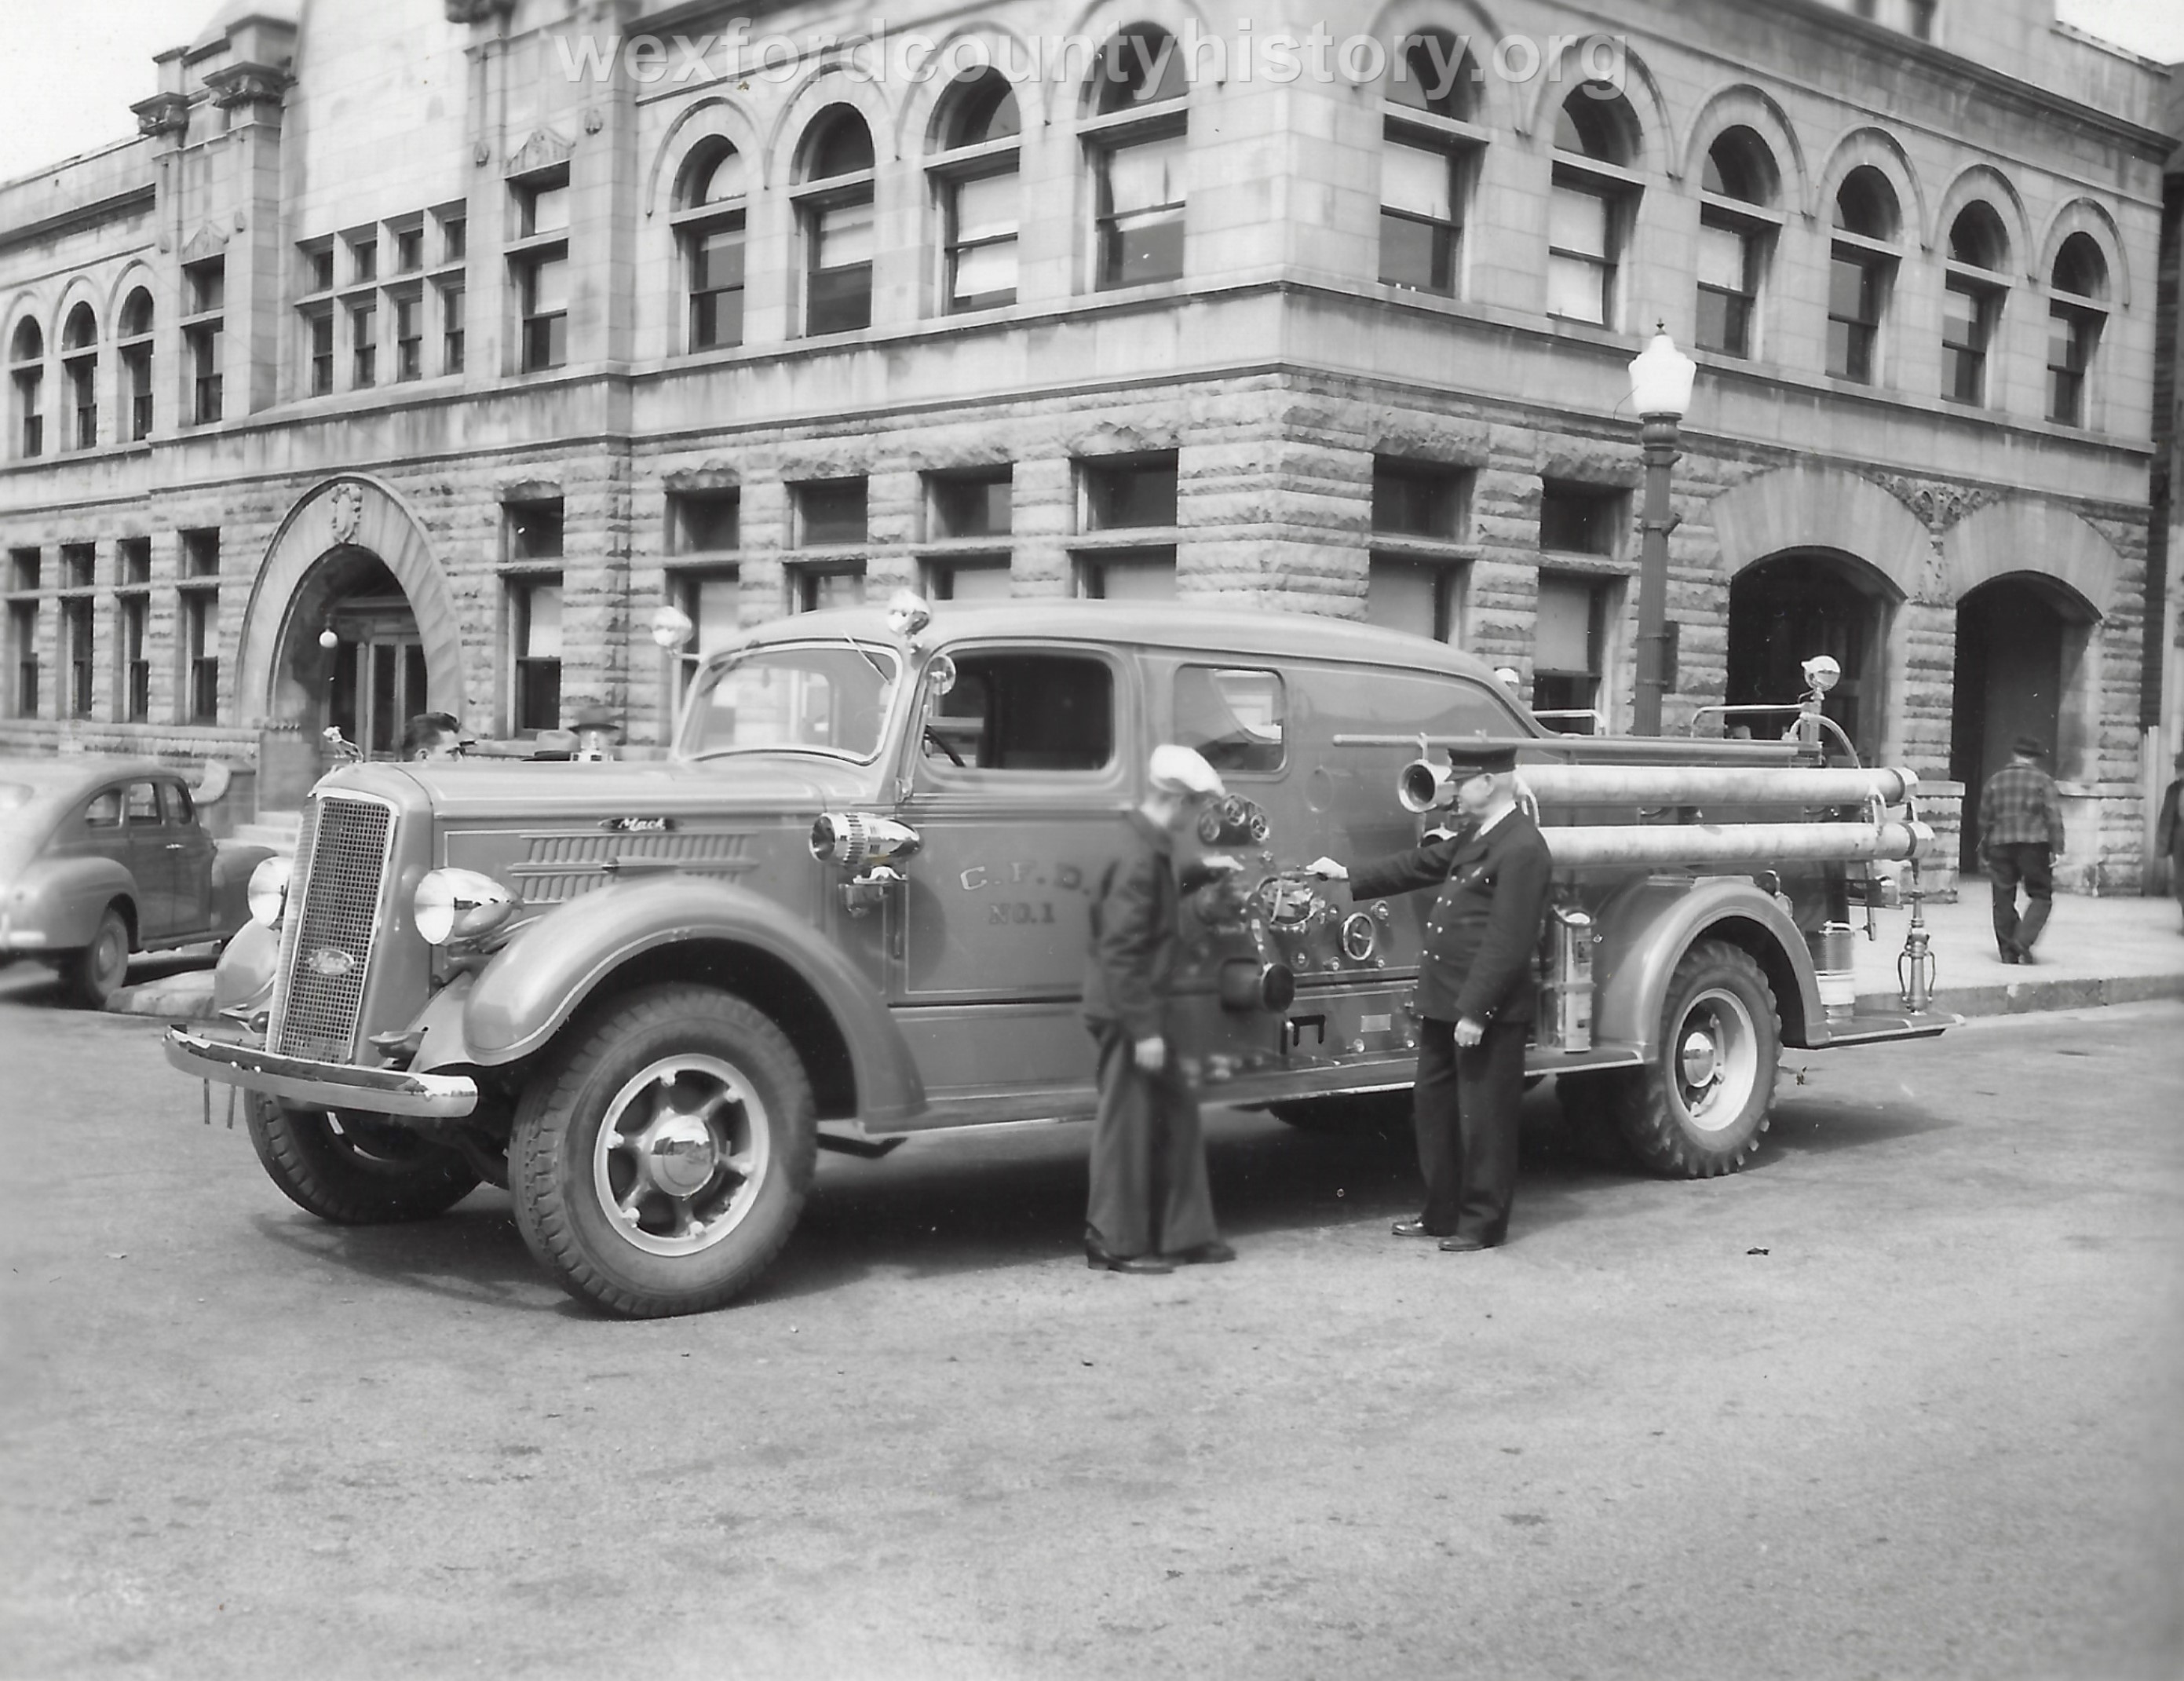 Cadillac Fire Department Truck at the City Hall